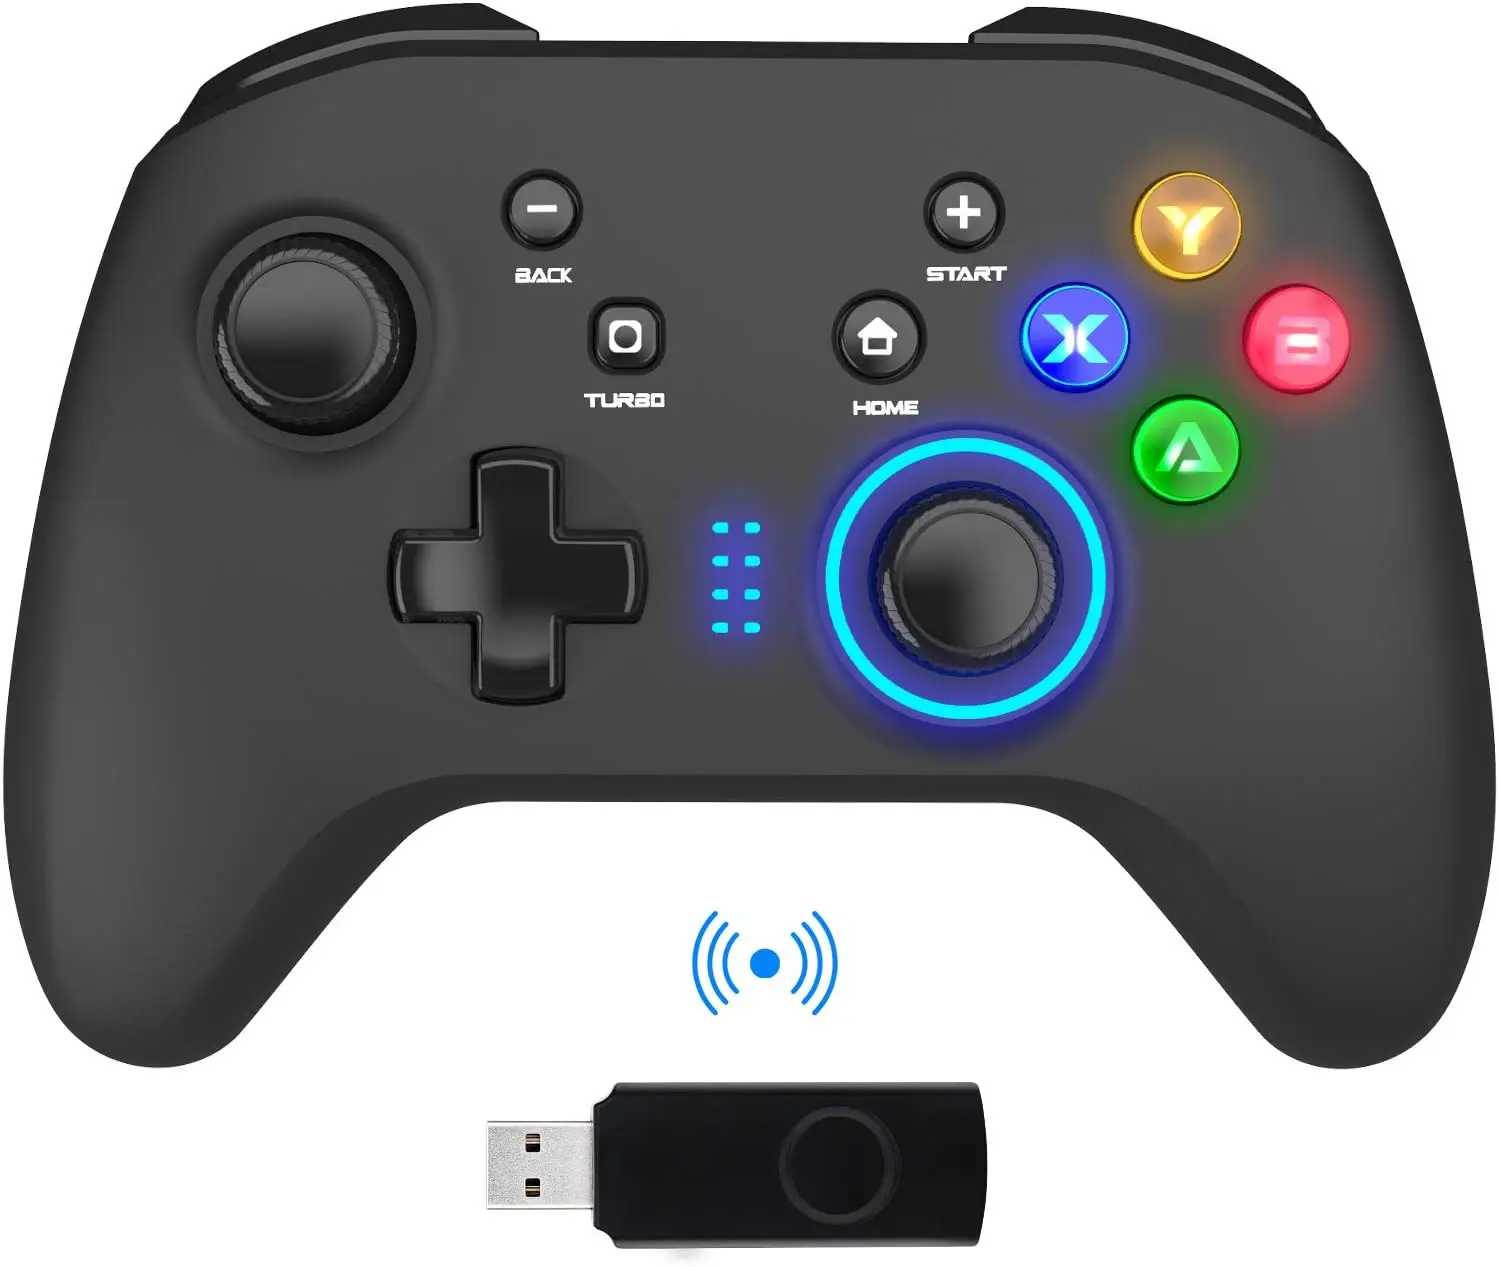 Wireless Gaming Controller,Pc Video Gamepad Joystick 2.4g Remote Console For 7/8/10/xp/laptop,Ps3,Switch - Buy Gamepad With Dual Vibration Remap M1-m4 Triggers,Wireless Joystick For Tablet Pc,For Android Tv Box Product on